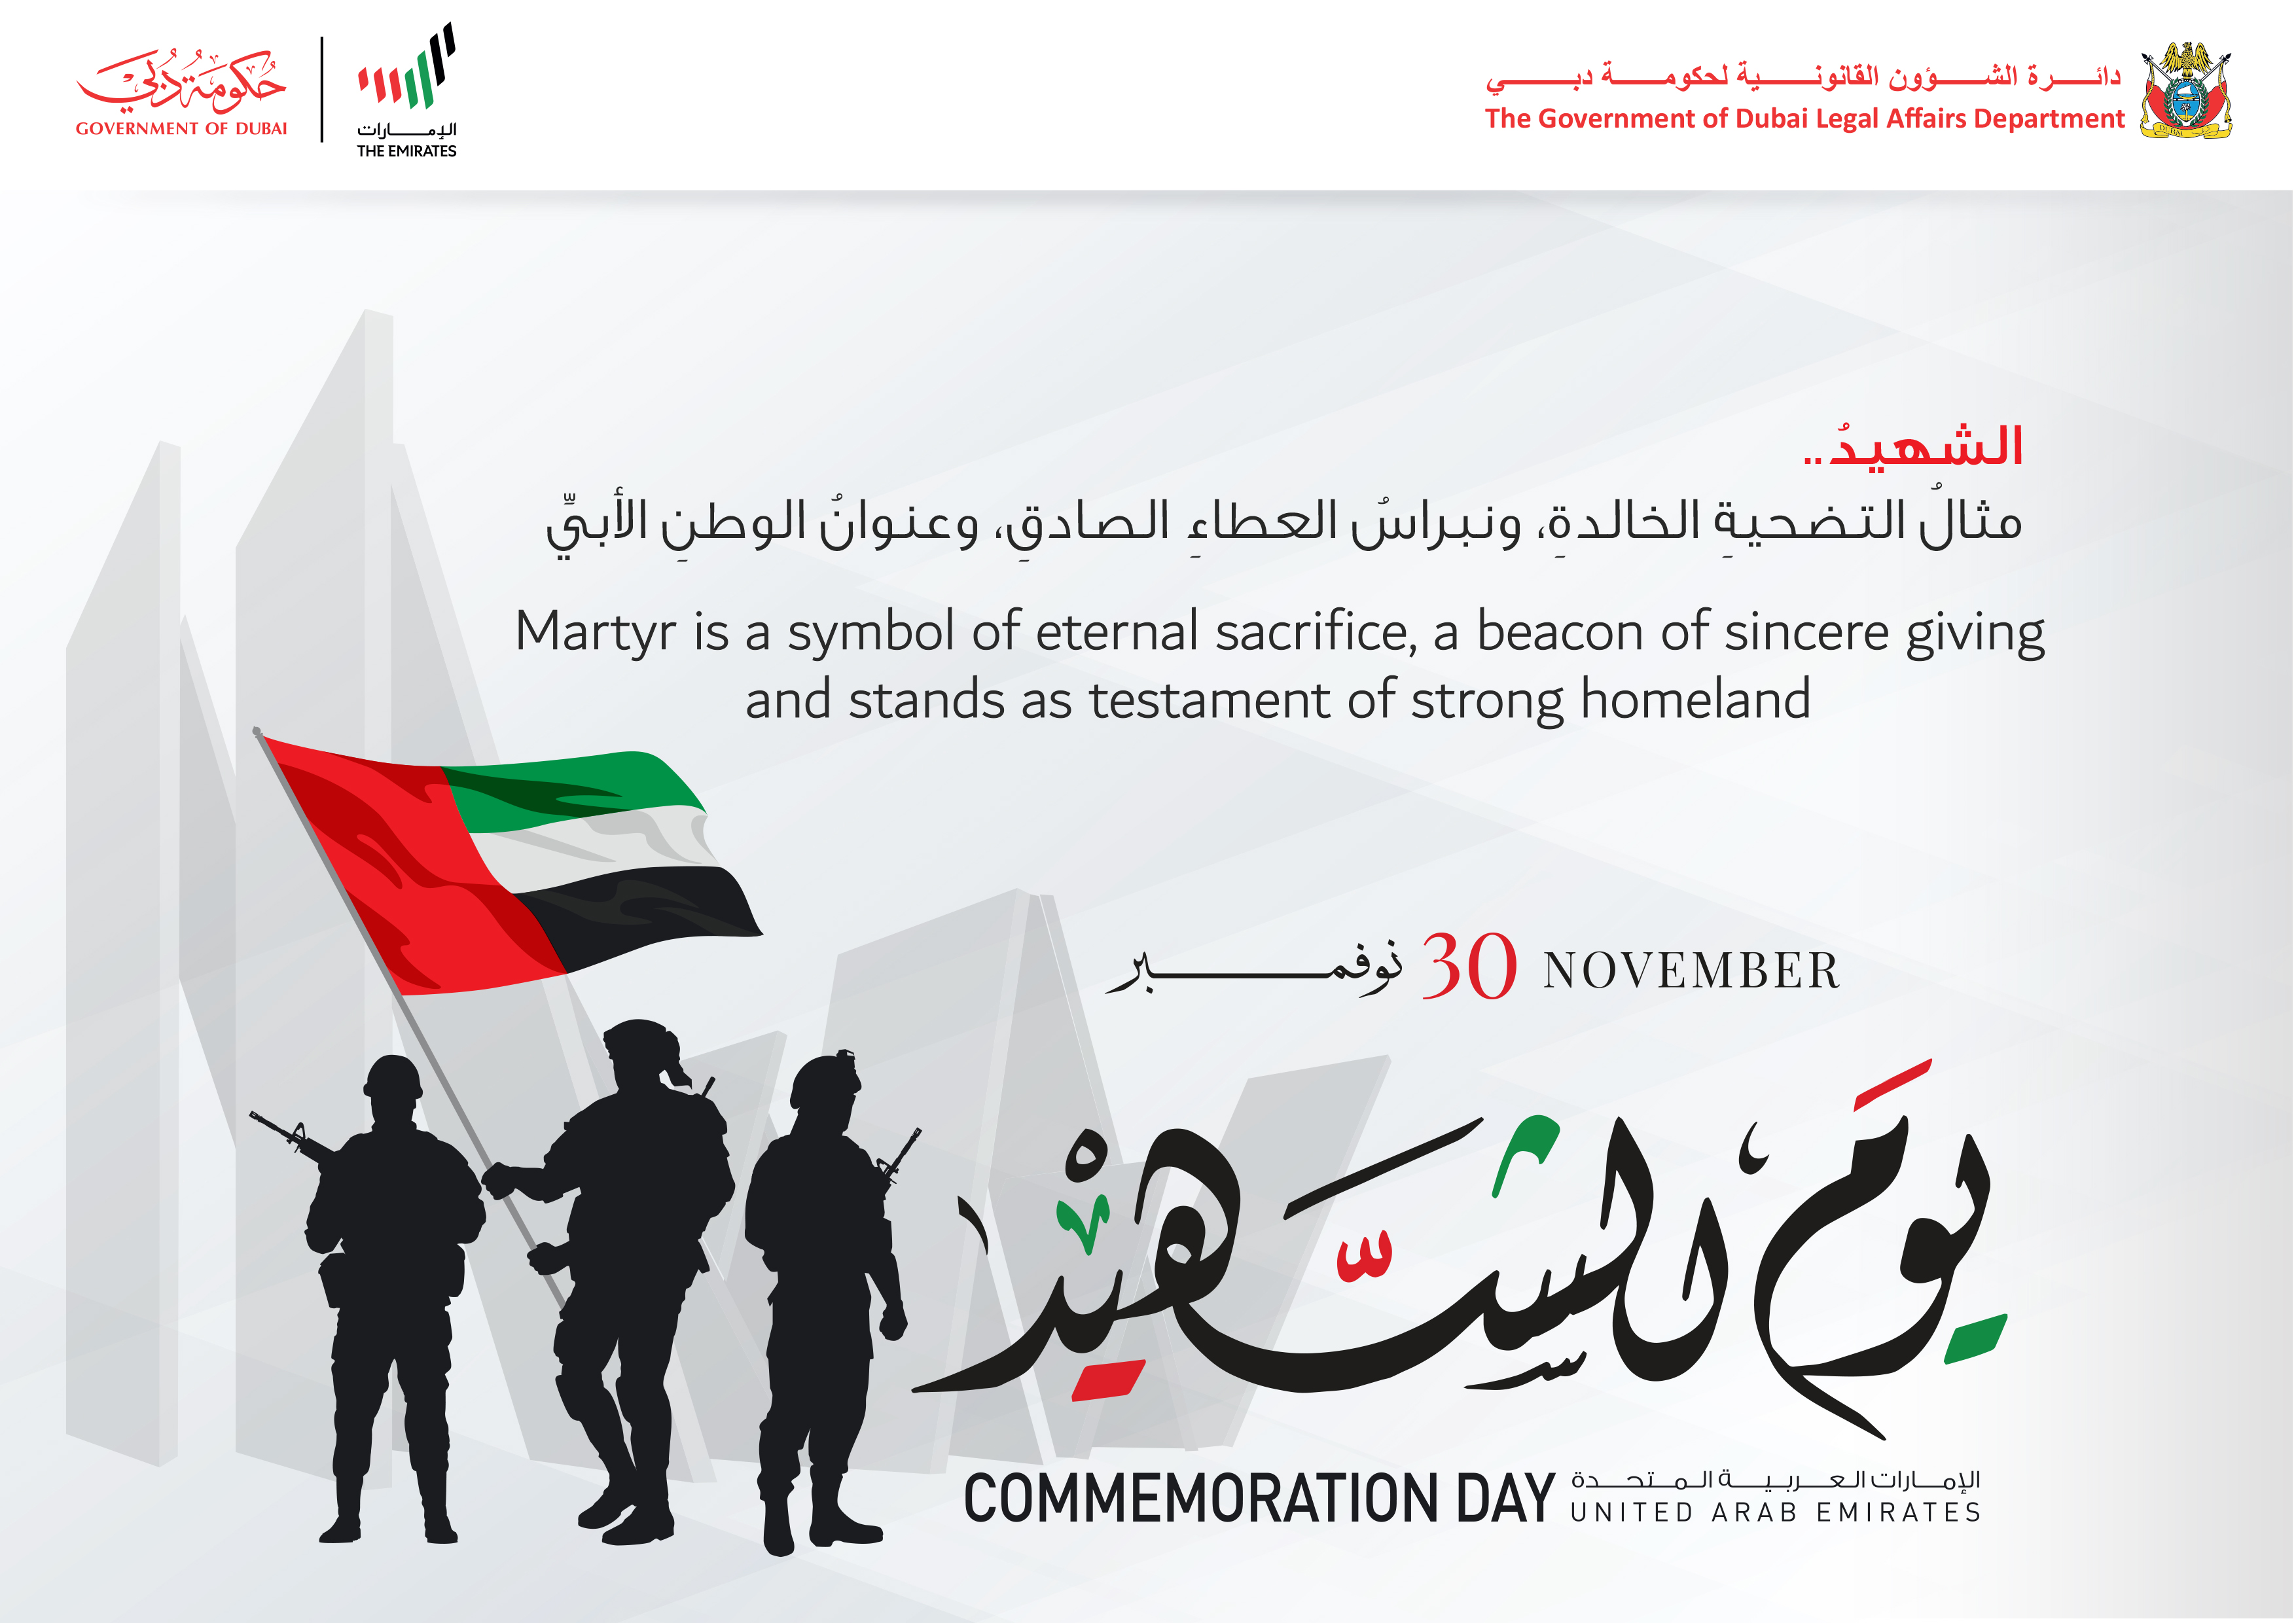 Statement of His Excellency Dr. Lowai Mohamed Belhoul, Director General of the Government of Dubai Legal Affairs Department on the Occasion of Commemoration Day